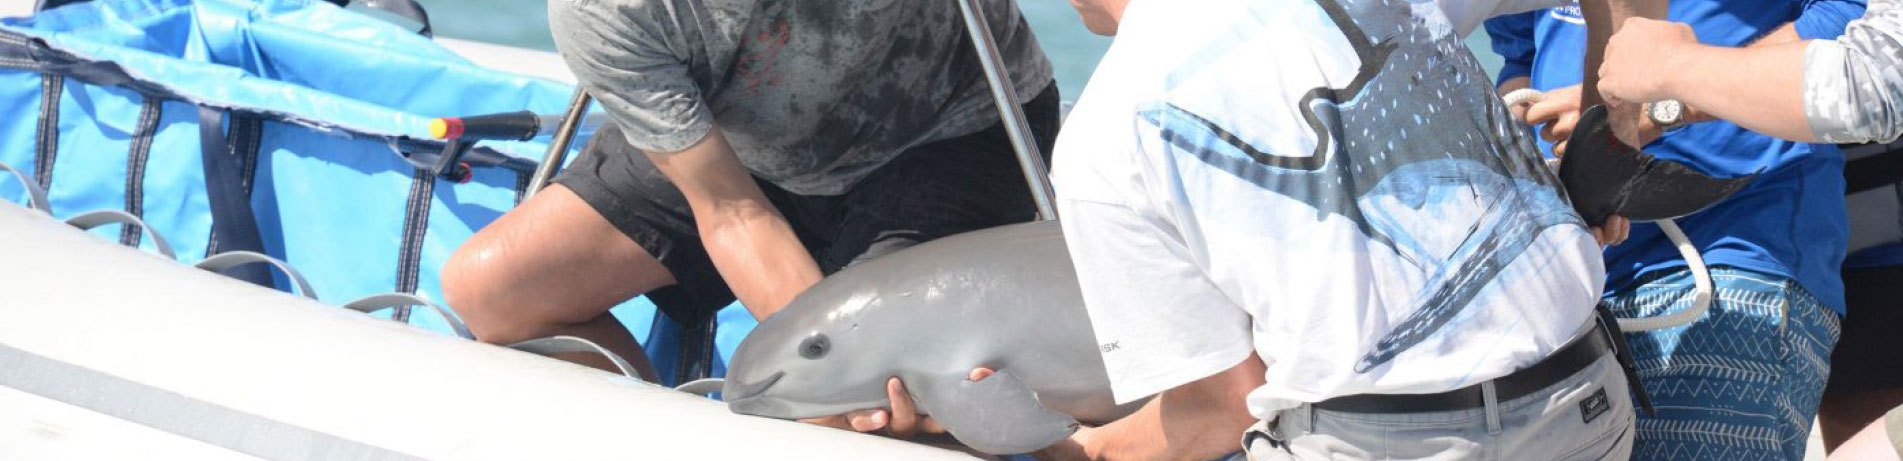 Vaquita calf being handled by members of the Vaquita CPR operation